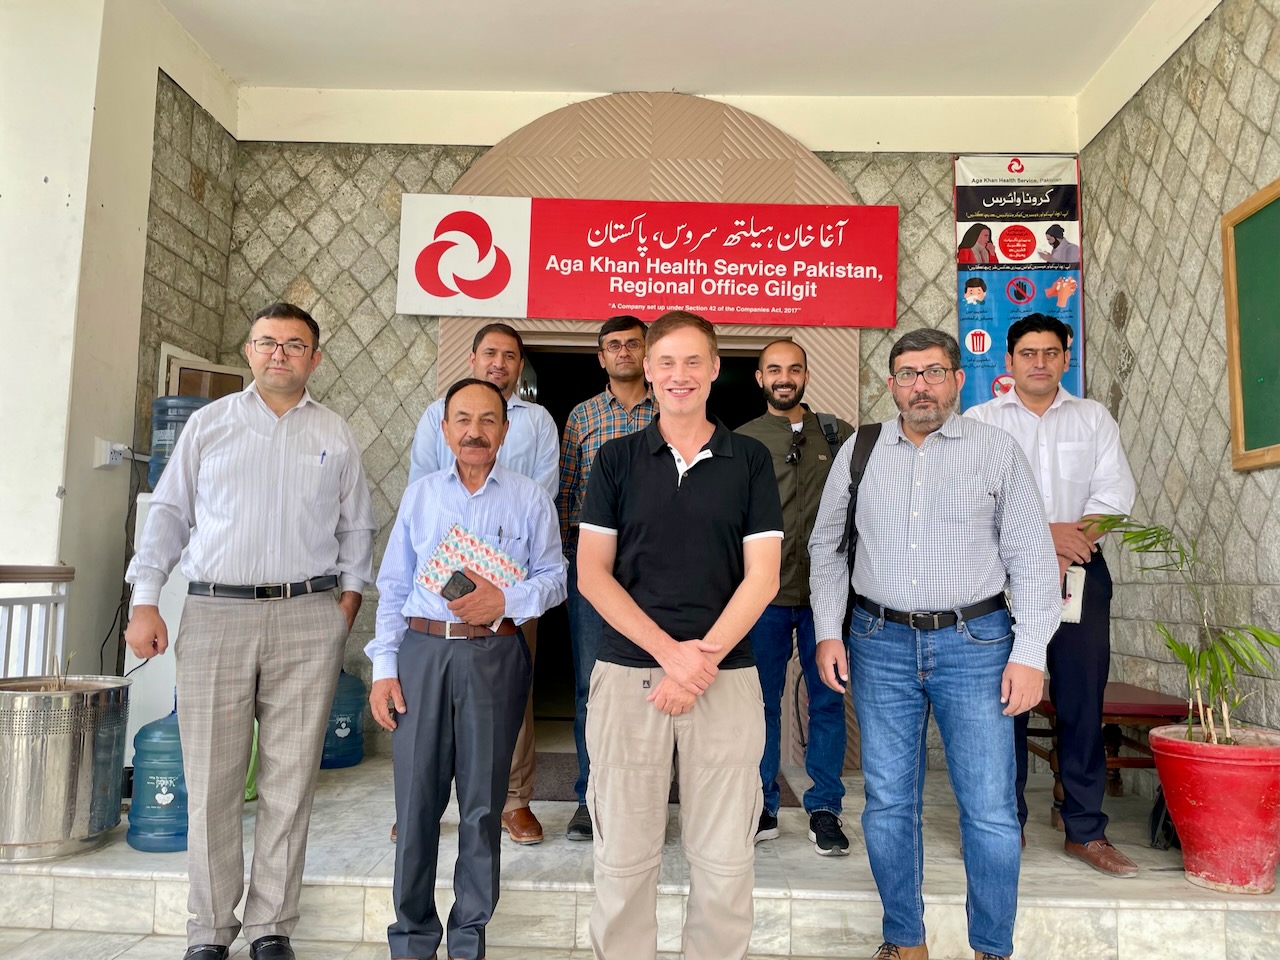 Dr. Morris posing for a photo with a group of seven other individuals. The banner behind them reads, "Aga Khan Health Service Pakistan, Regional Office Gilgit".